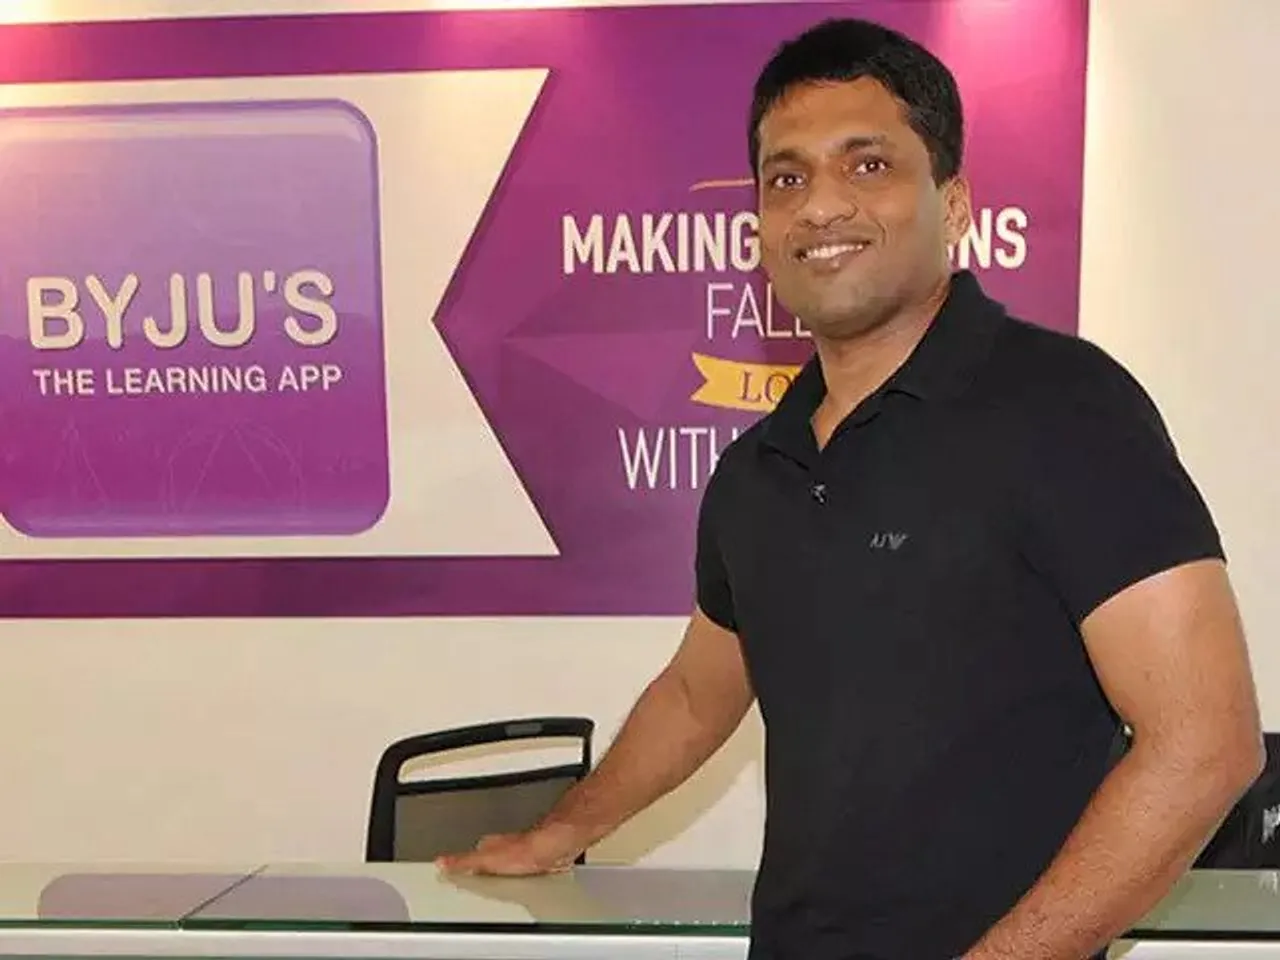 Byju’s in advanced stages of talks to acquire Toppr